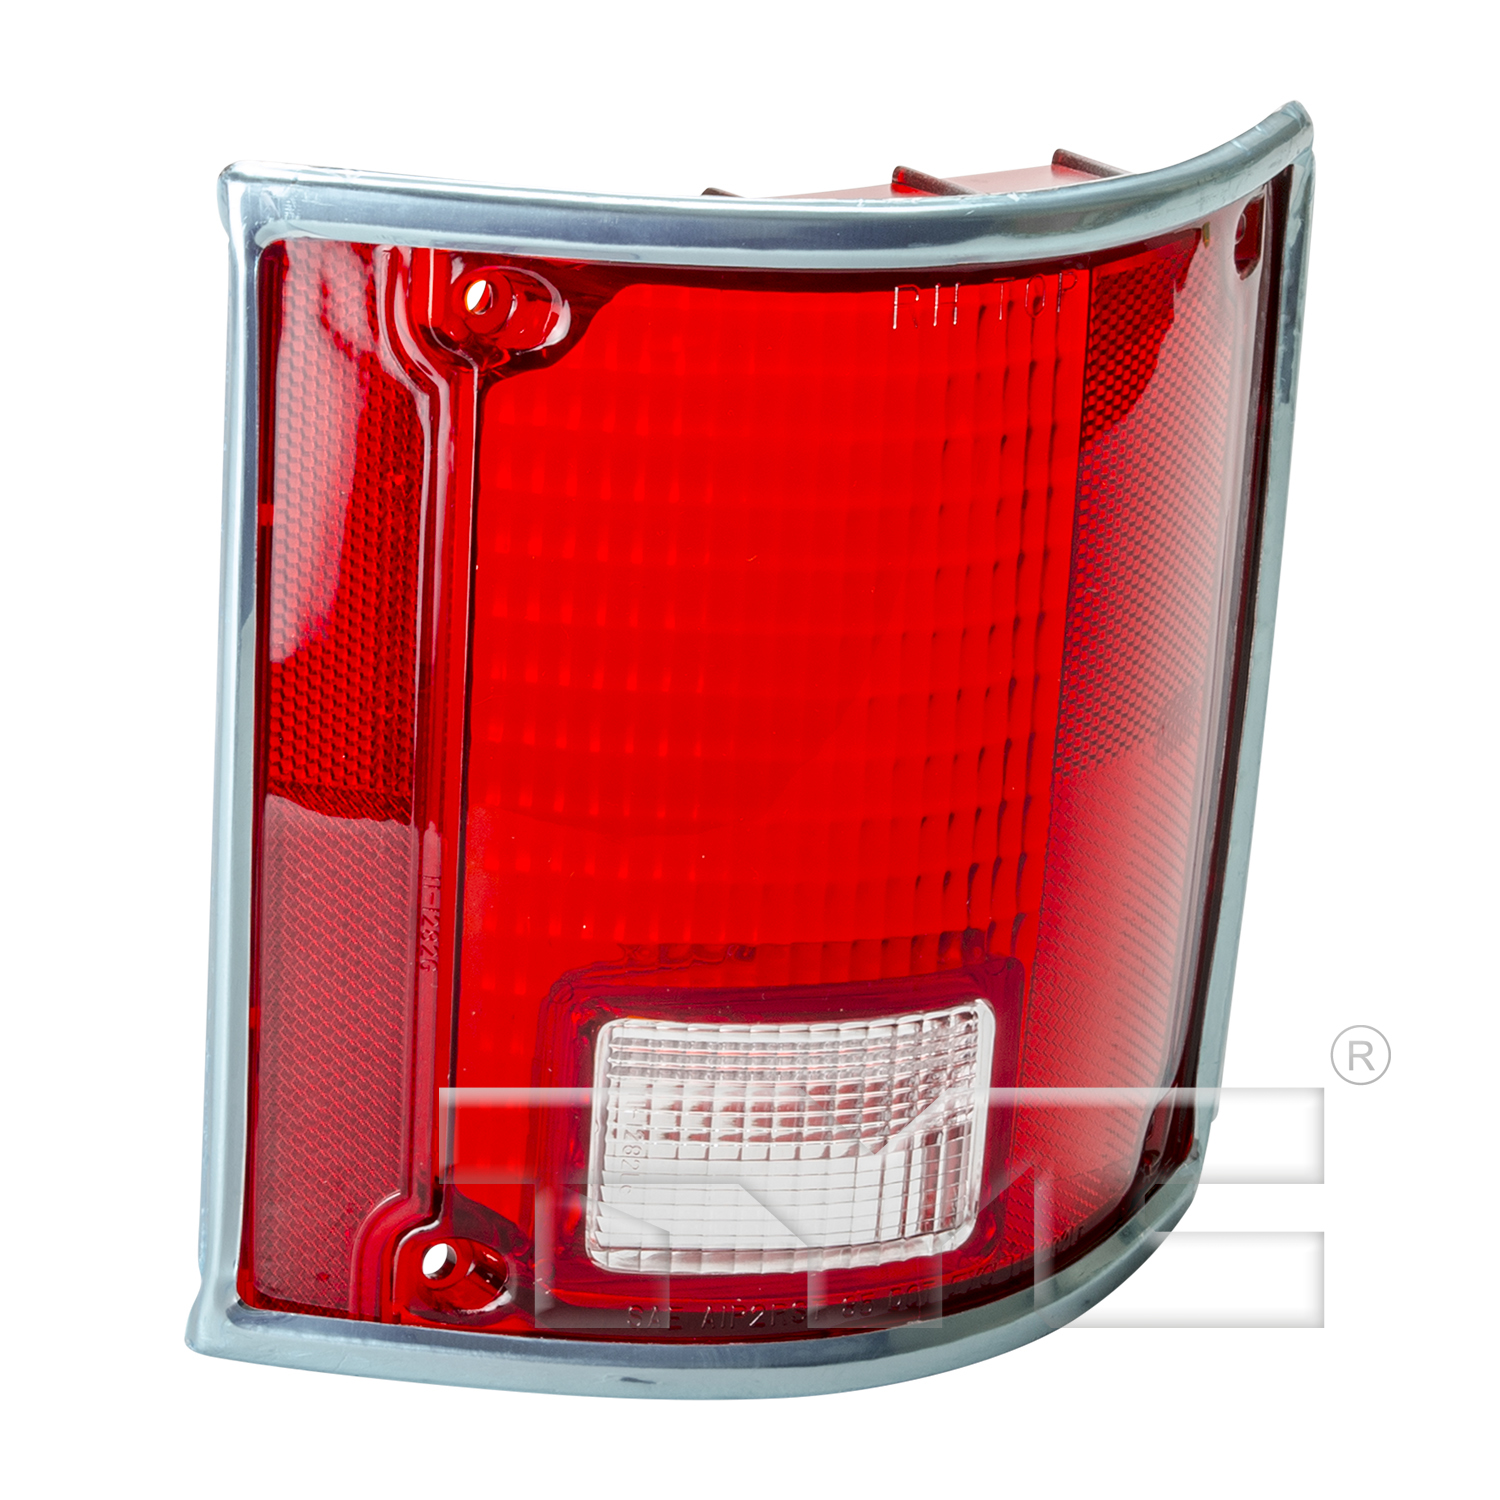 Aftermarket TAILLIGHTS for GMC - C25, C25,75-78,RT Taillamp lens